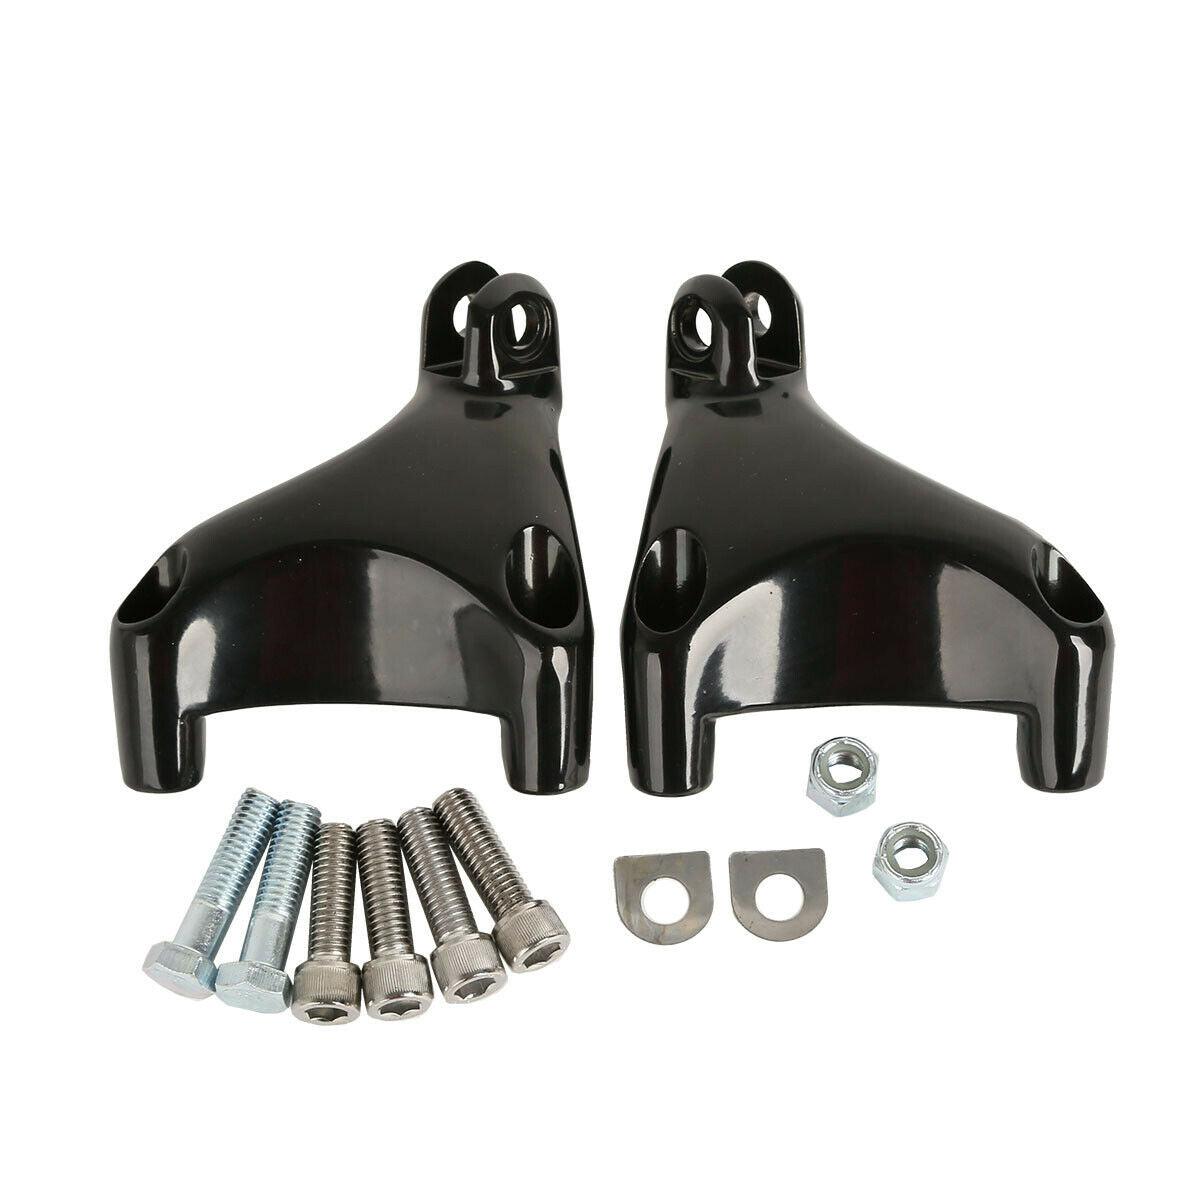 Passenger Rear Footpegs Foot Pegs Mount Fit For Harley SportsterXL883 1200 04-13 - Moto Life Products